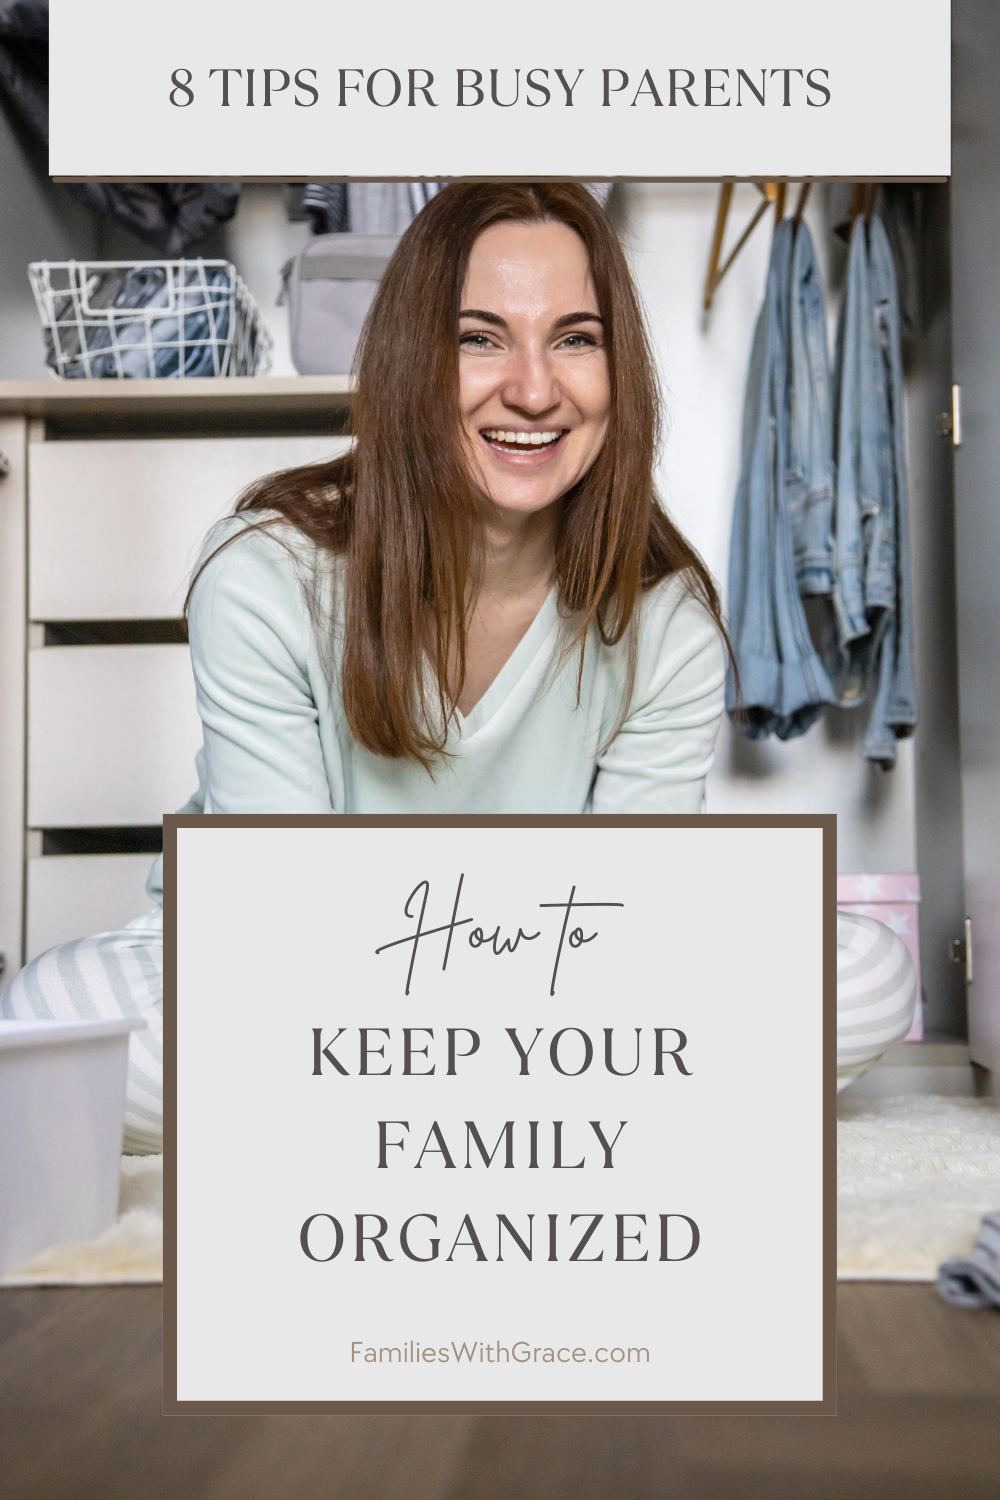 How to keep your family organized